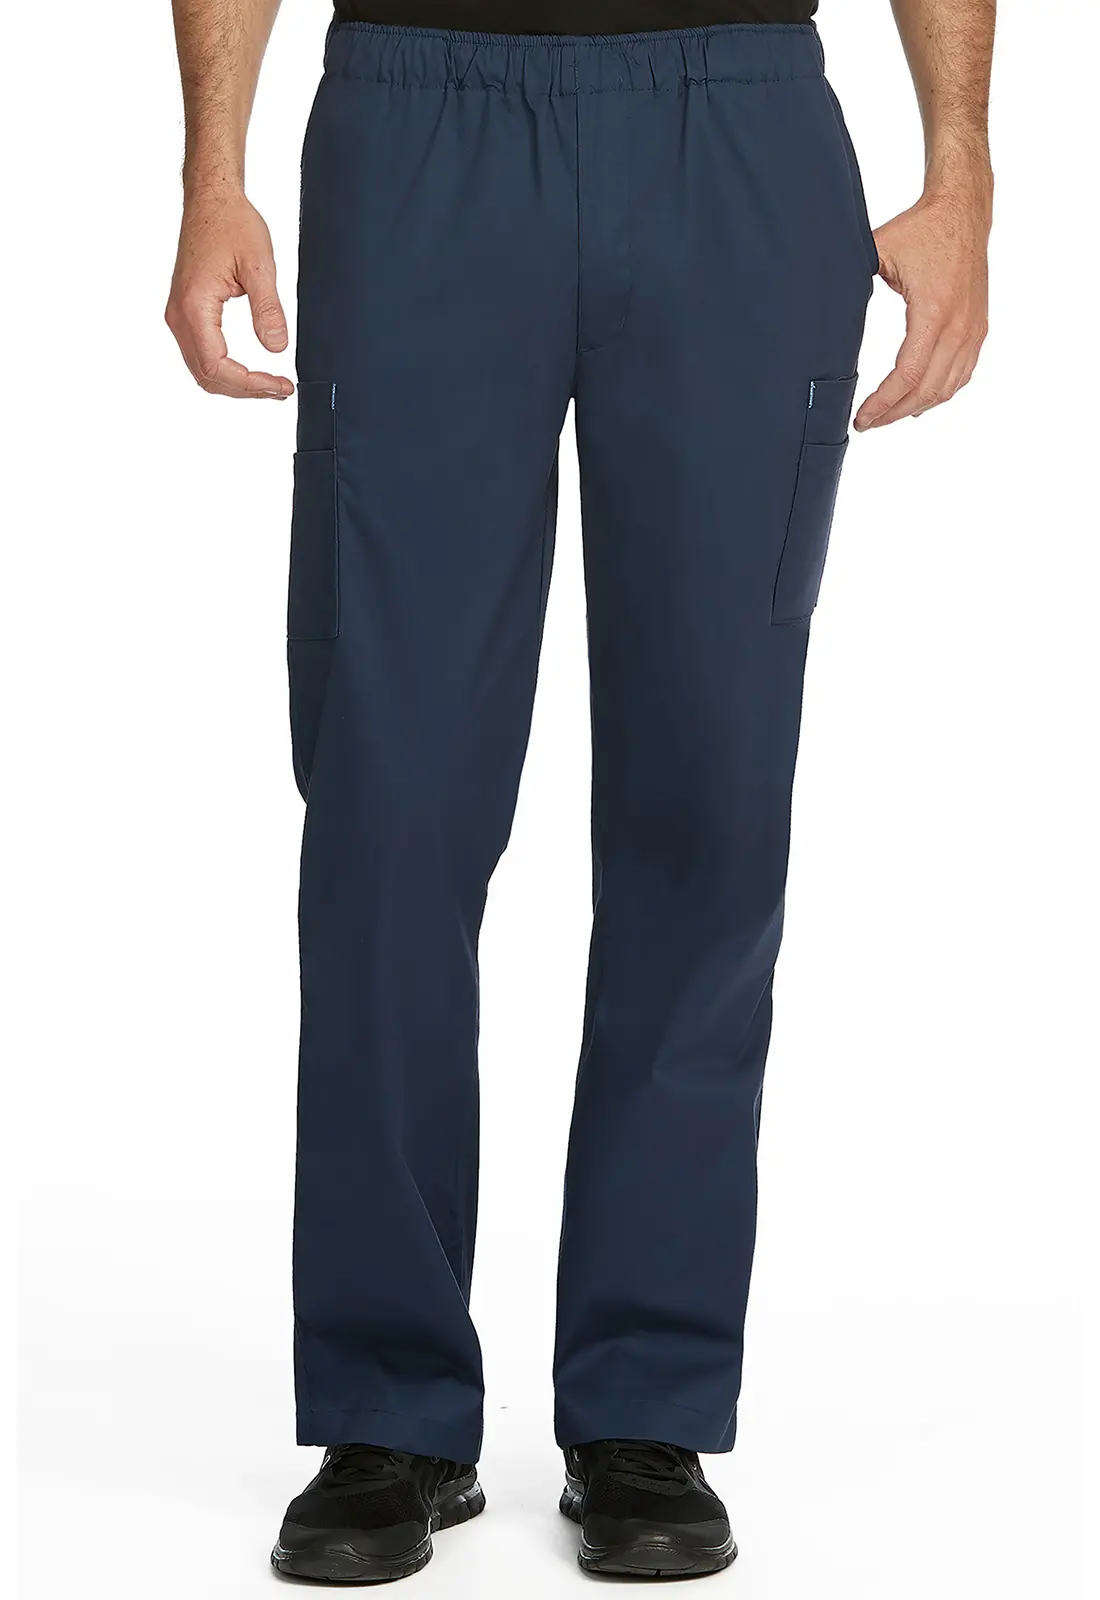 Touch 2 Cargo Pocket Pant